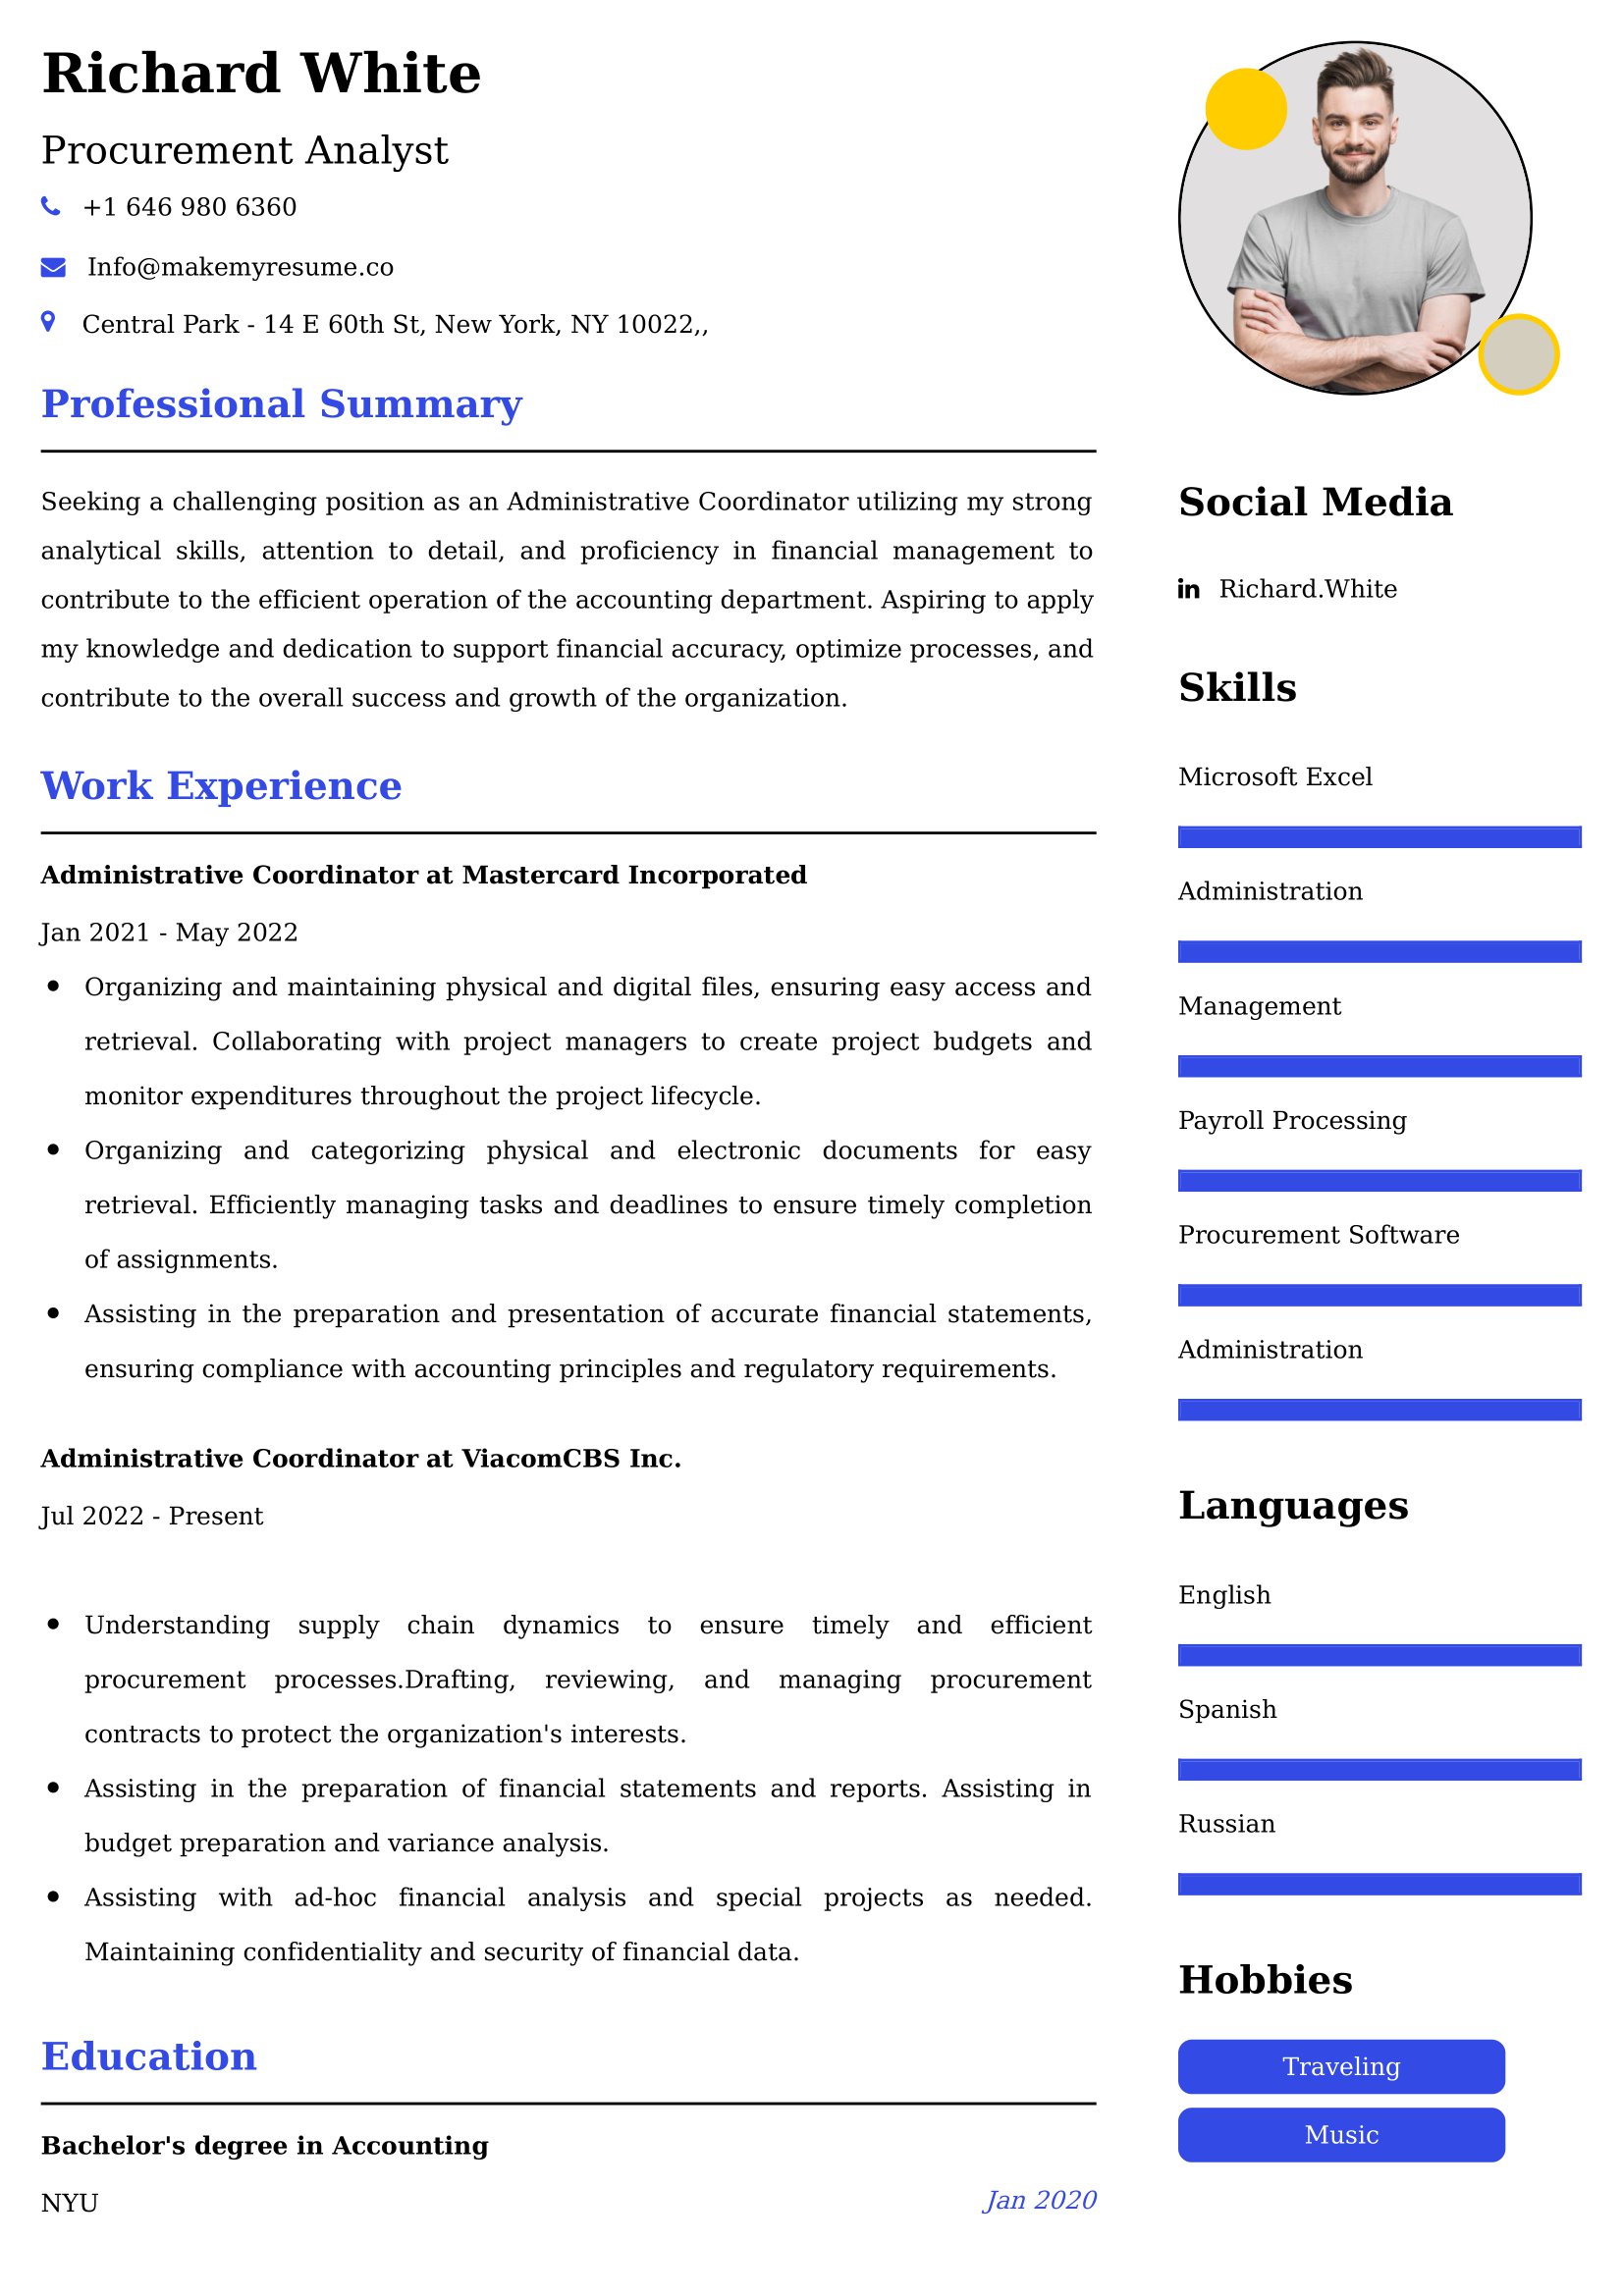 Procurement Analyst Resume Examples - Australian Format and Tips